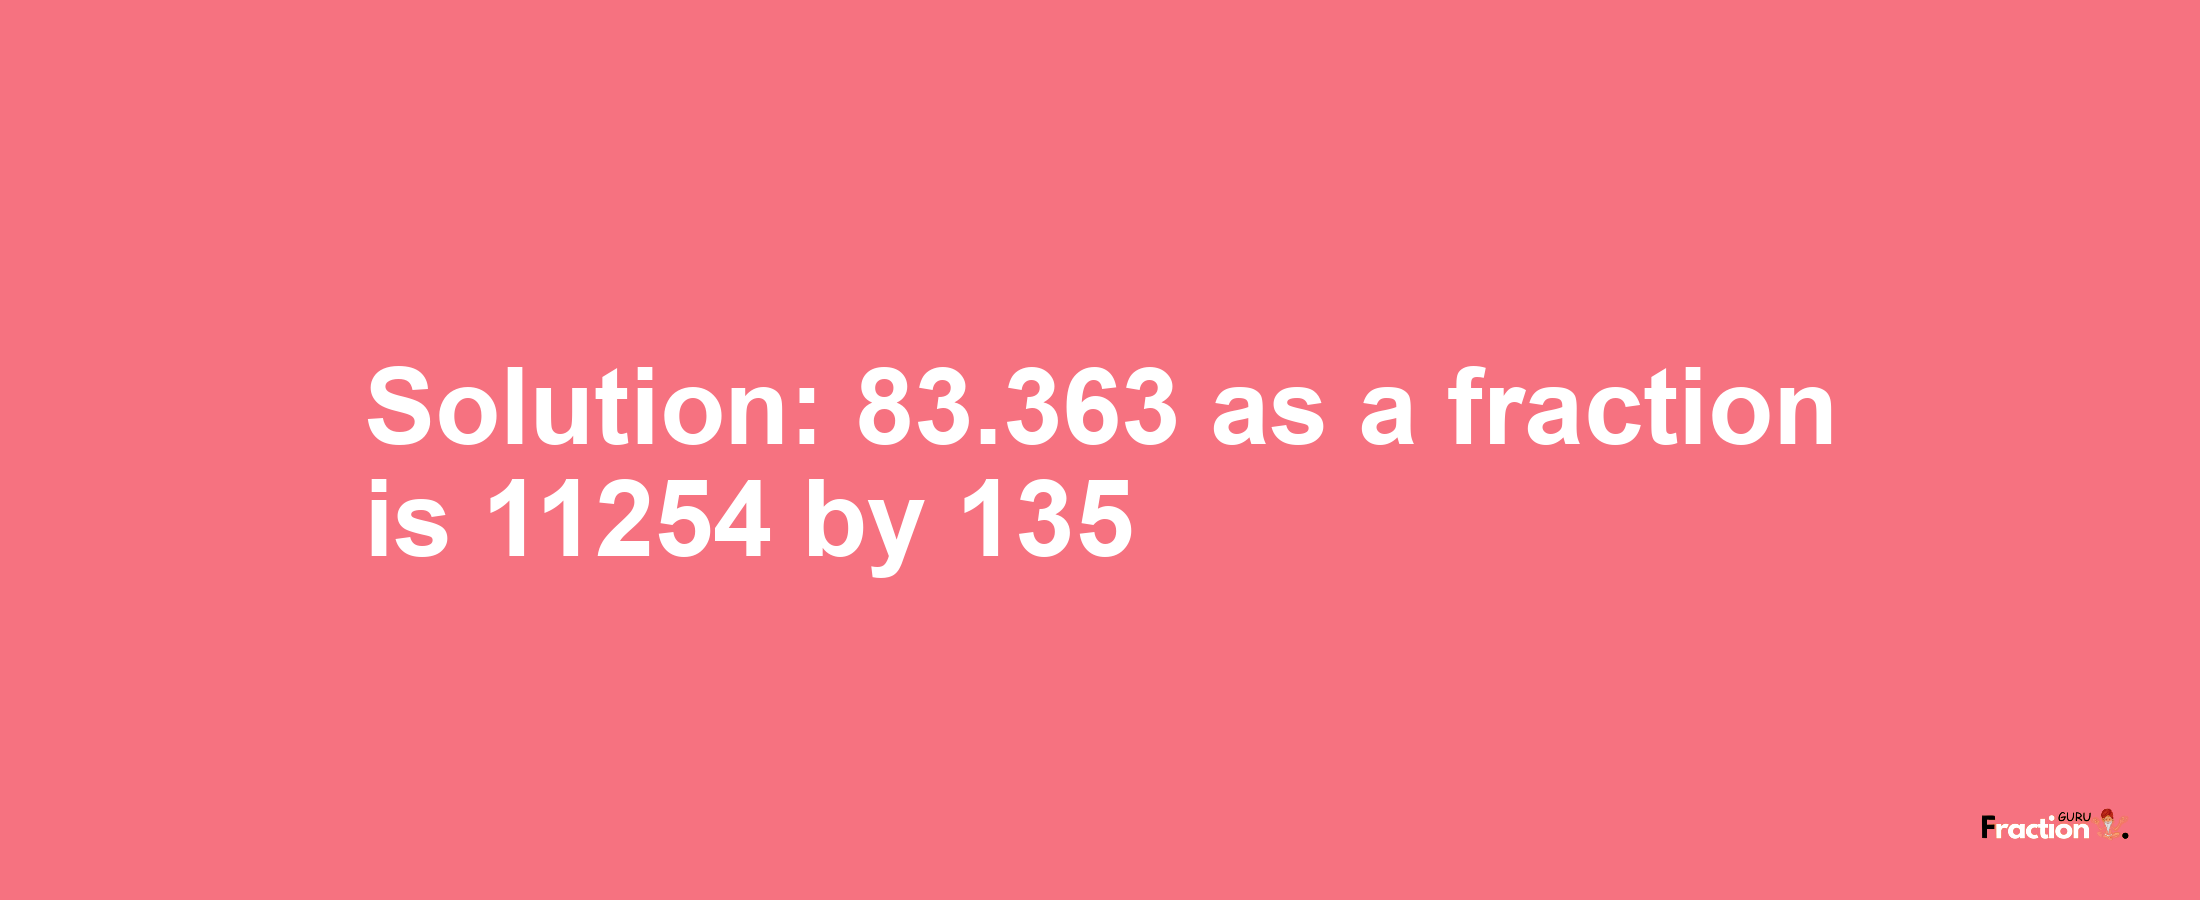 Solution:83.363 as a fraction is 11254/135